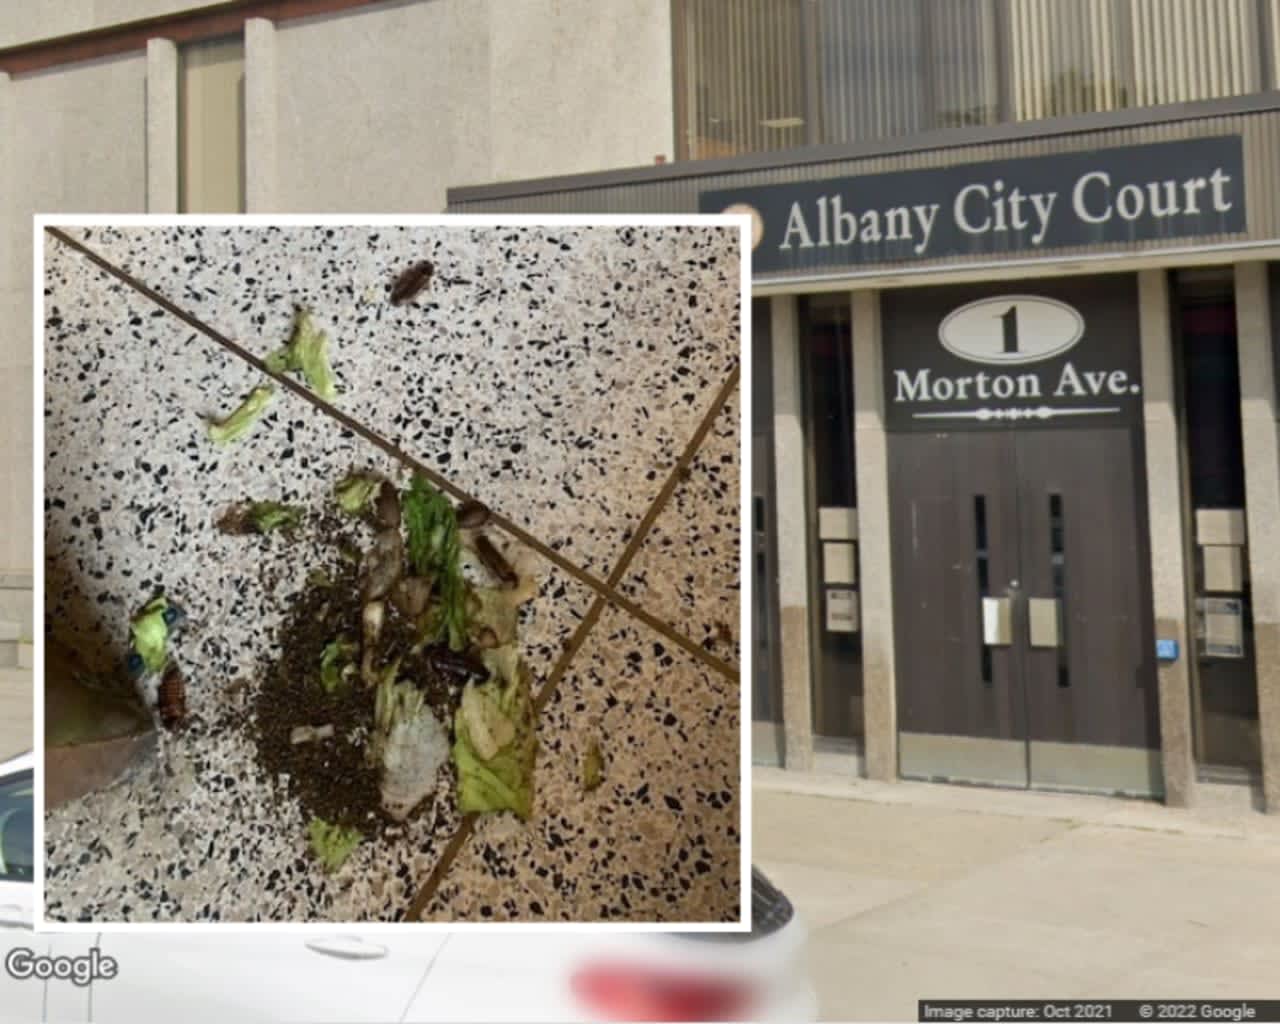 Cockroaches released by a protester inside Albany City Court Tuesday, June 7.